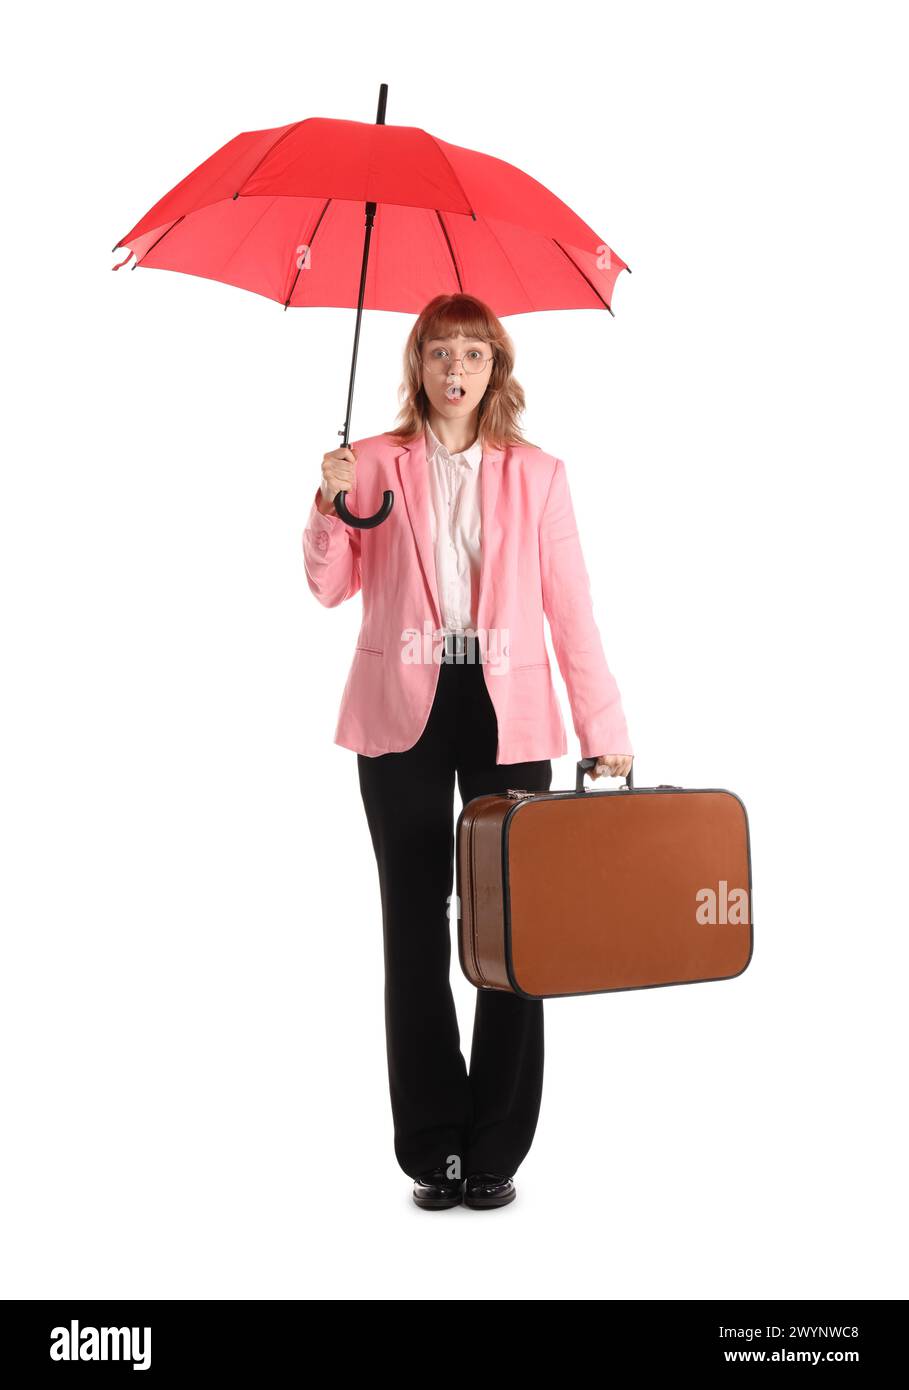 Funny shocked businesswoman with umbrella and briefcase isolated on white background Stock Photo